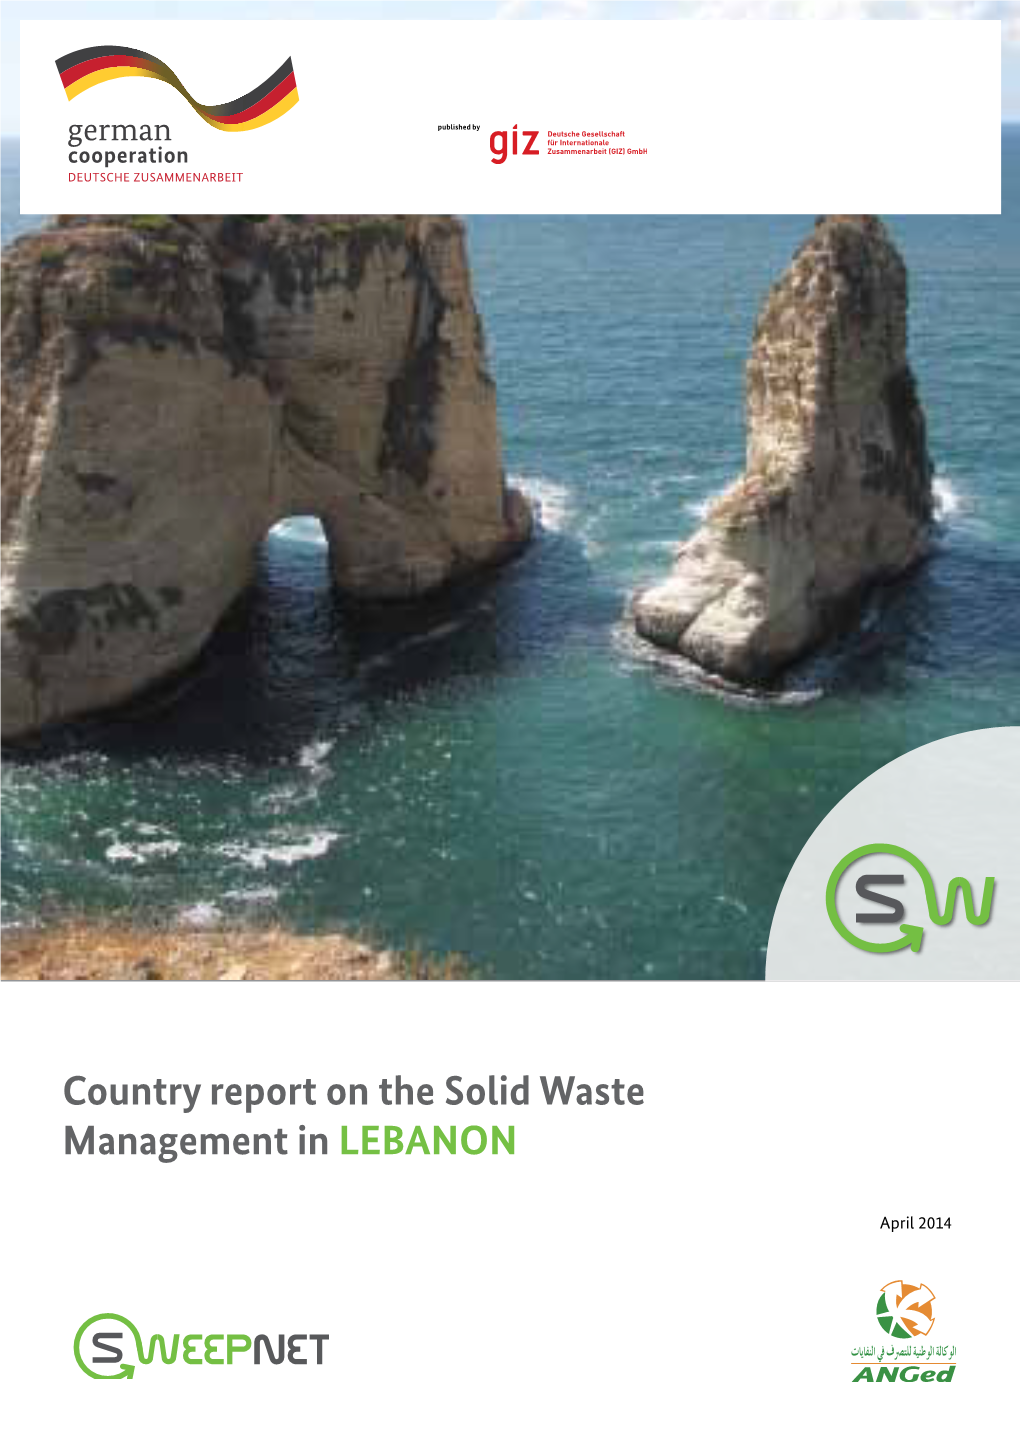 Country Report on the Solid Waste Management in LEBANON